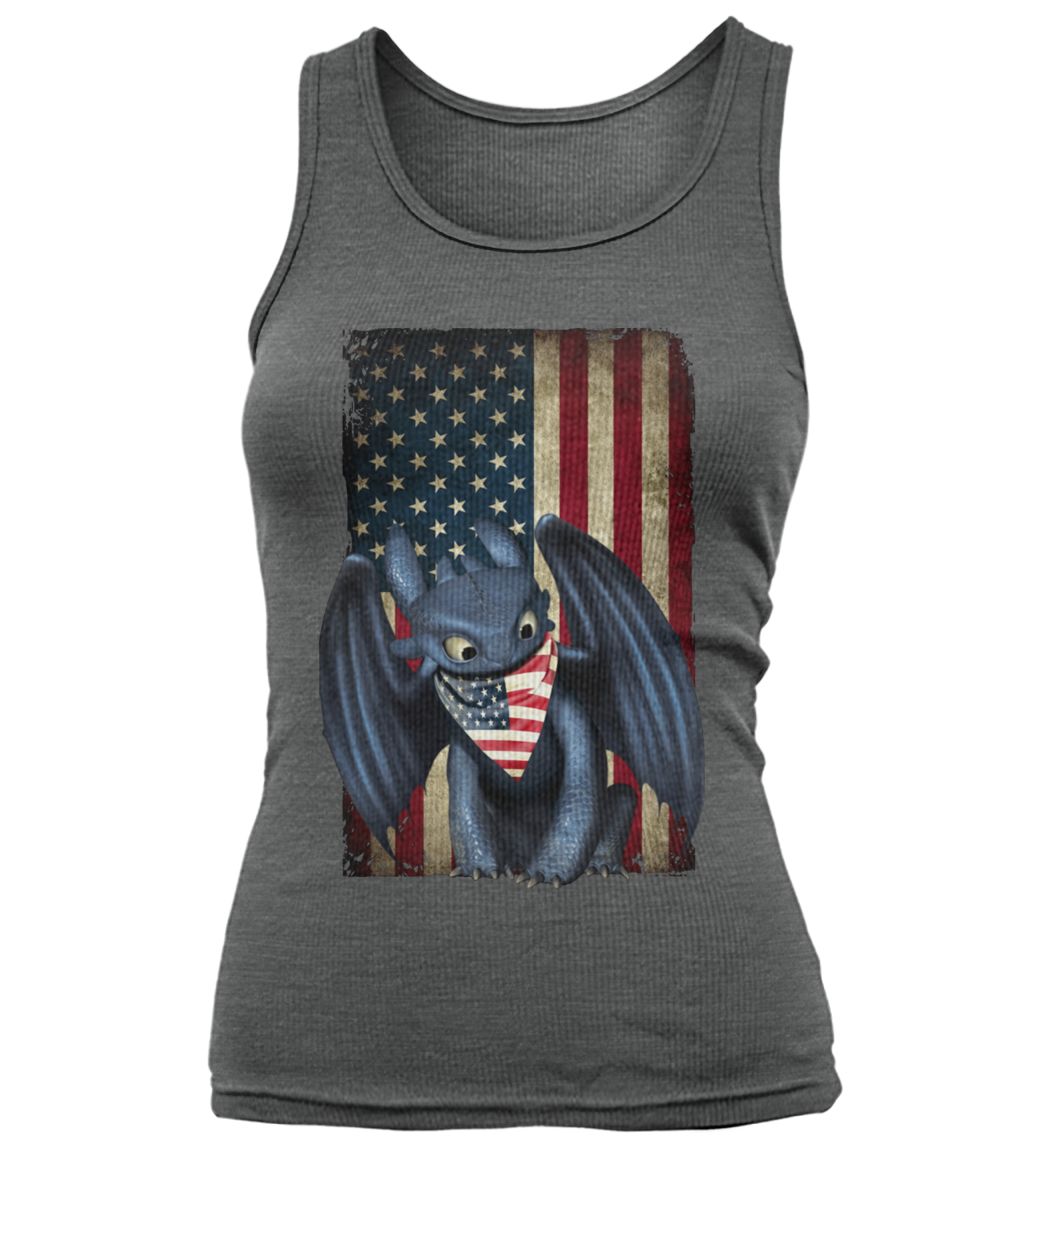 Toothless american flag 4th of july women's tank top